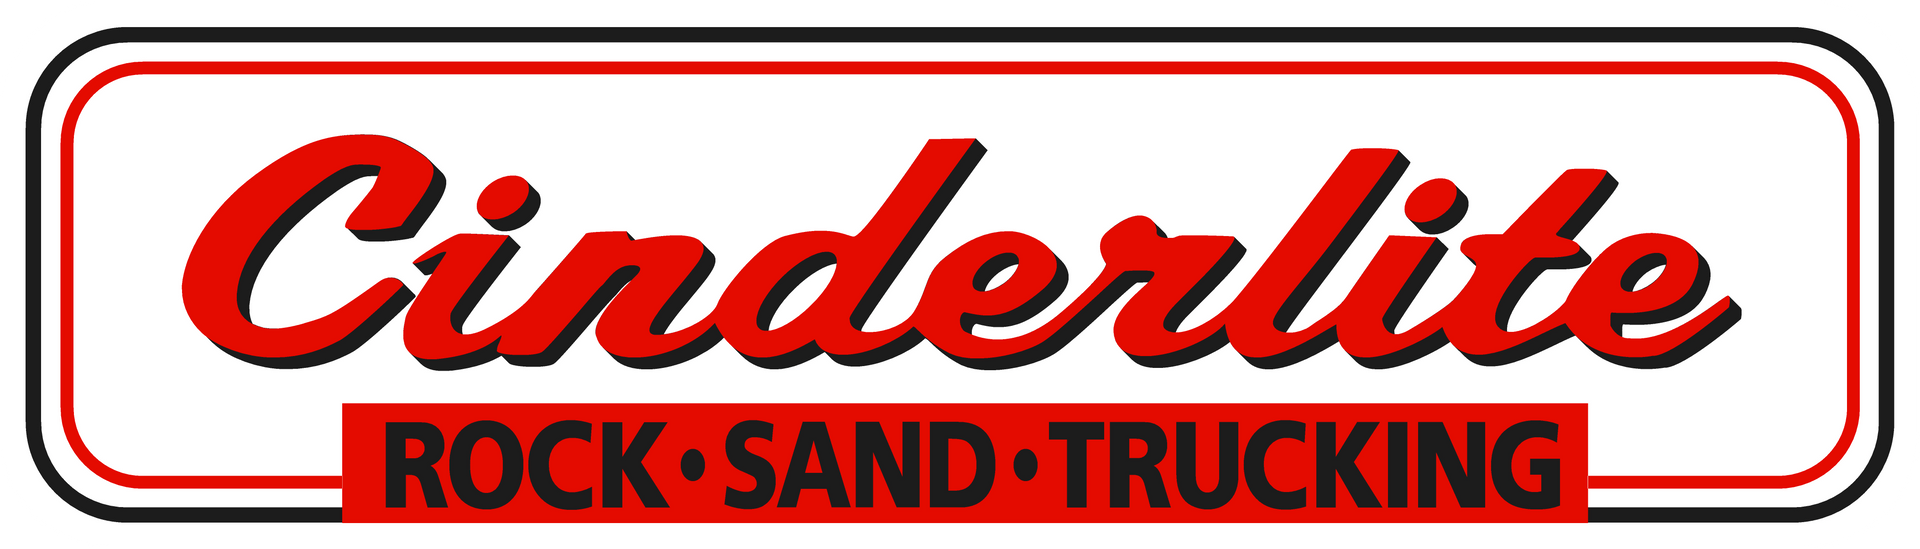 A red and white logo for cinderlite rock sand trucking